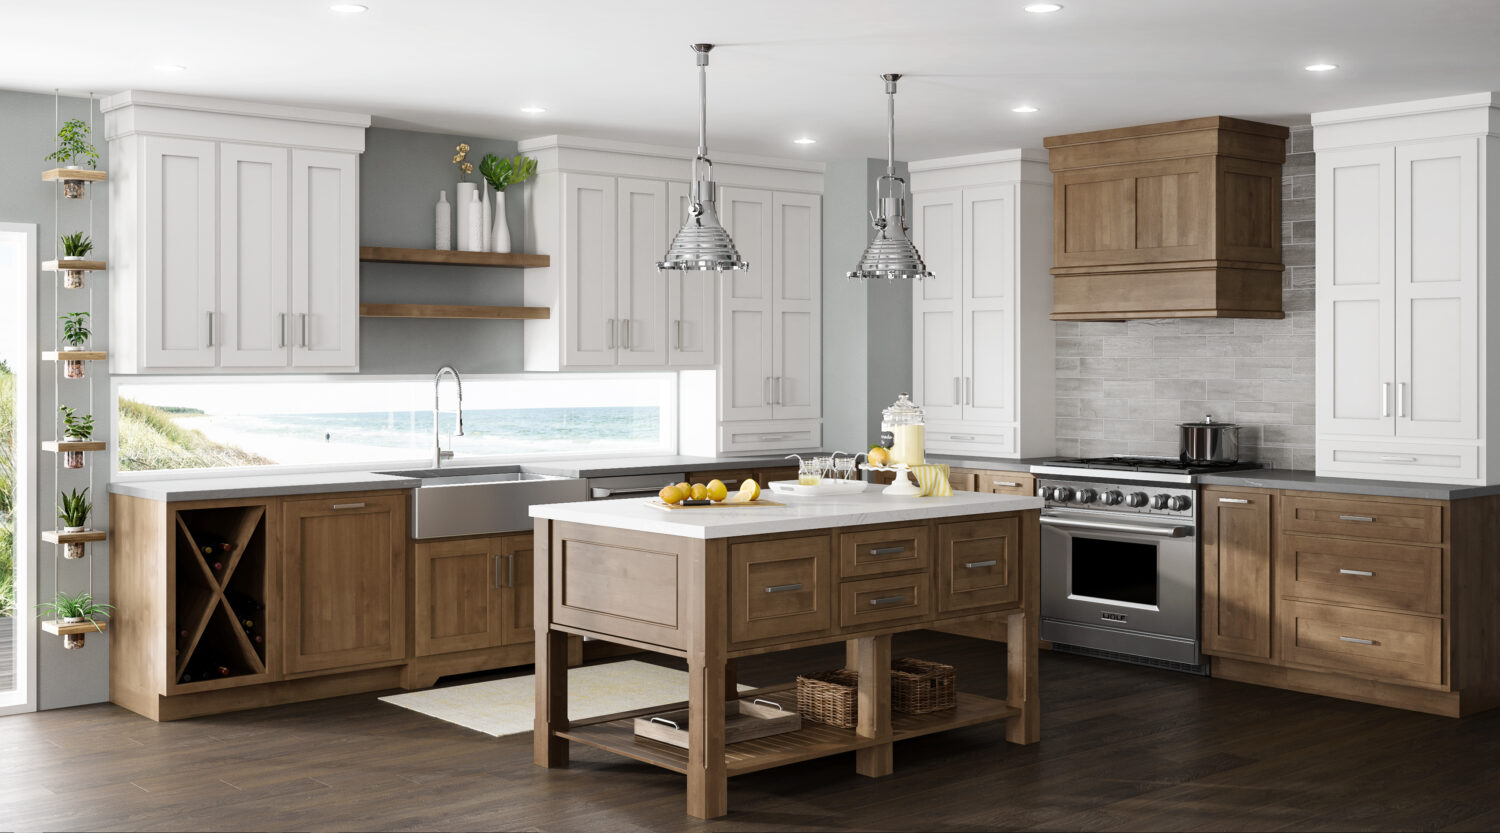 A kitchen layout idea in an L-Shaped kitchen design with a farm table style kitchen island using Standard overlay cabinet doors.